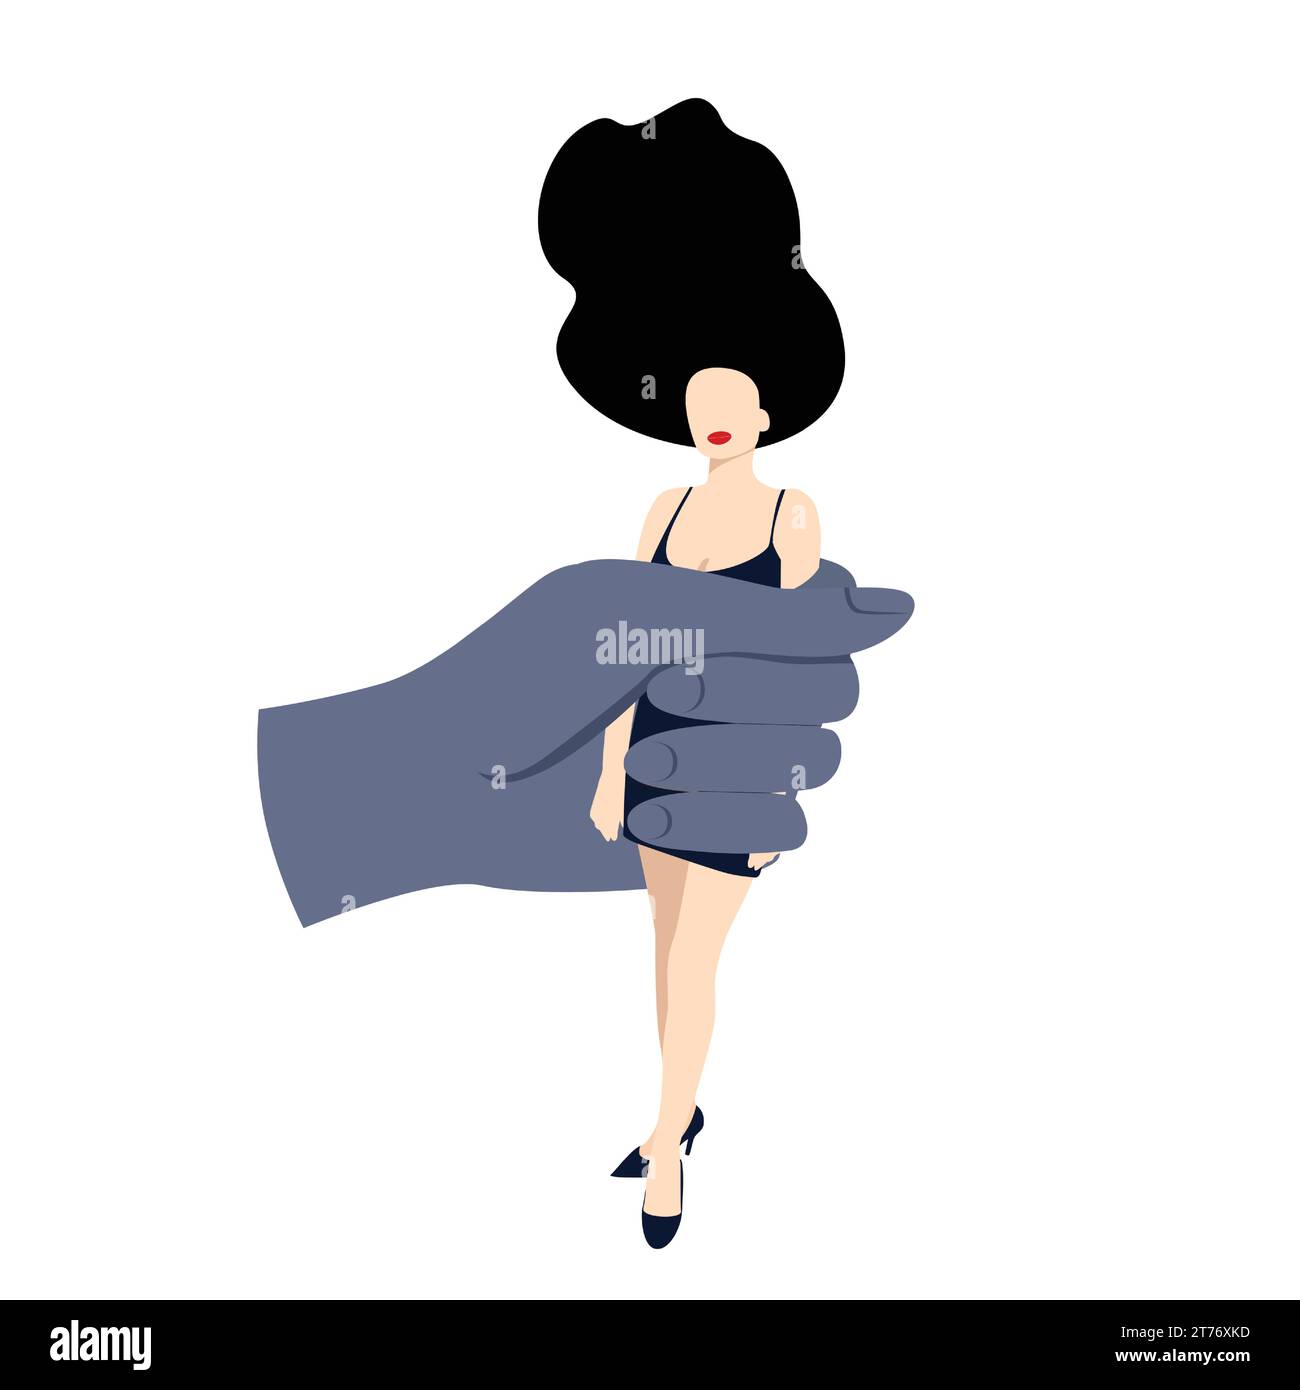 A woman in an evening dress is clasped in a man's hand. The concept of a girl in captivity, domestic violence, manipulation, gaslighting. Stock Vector